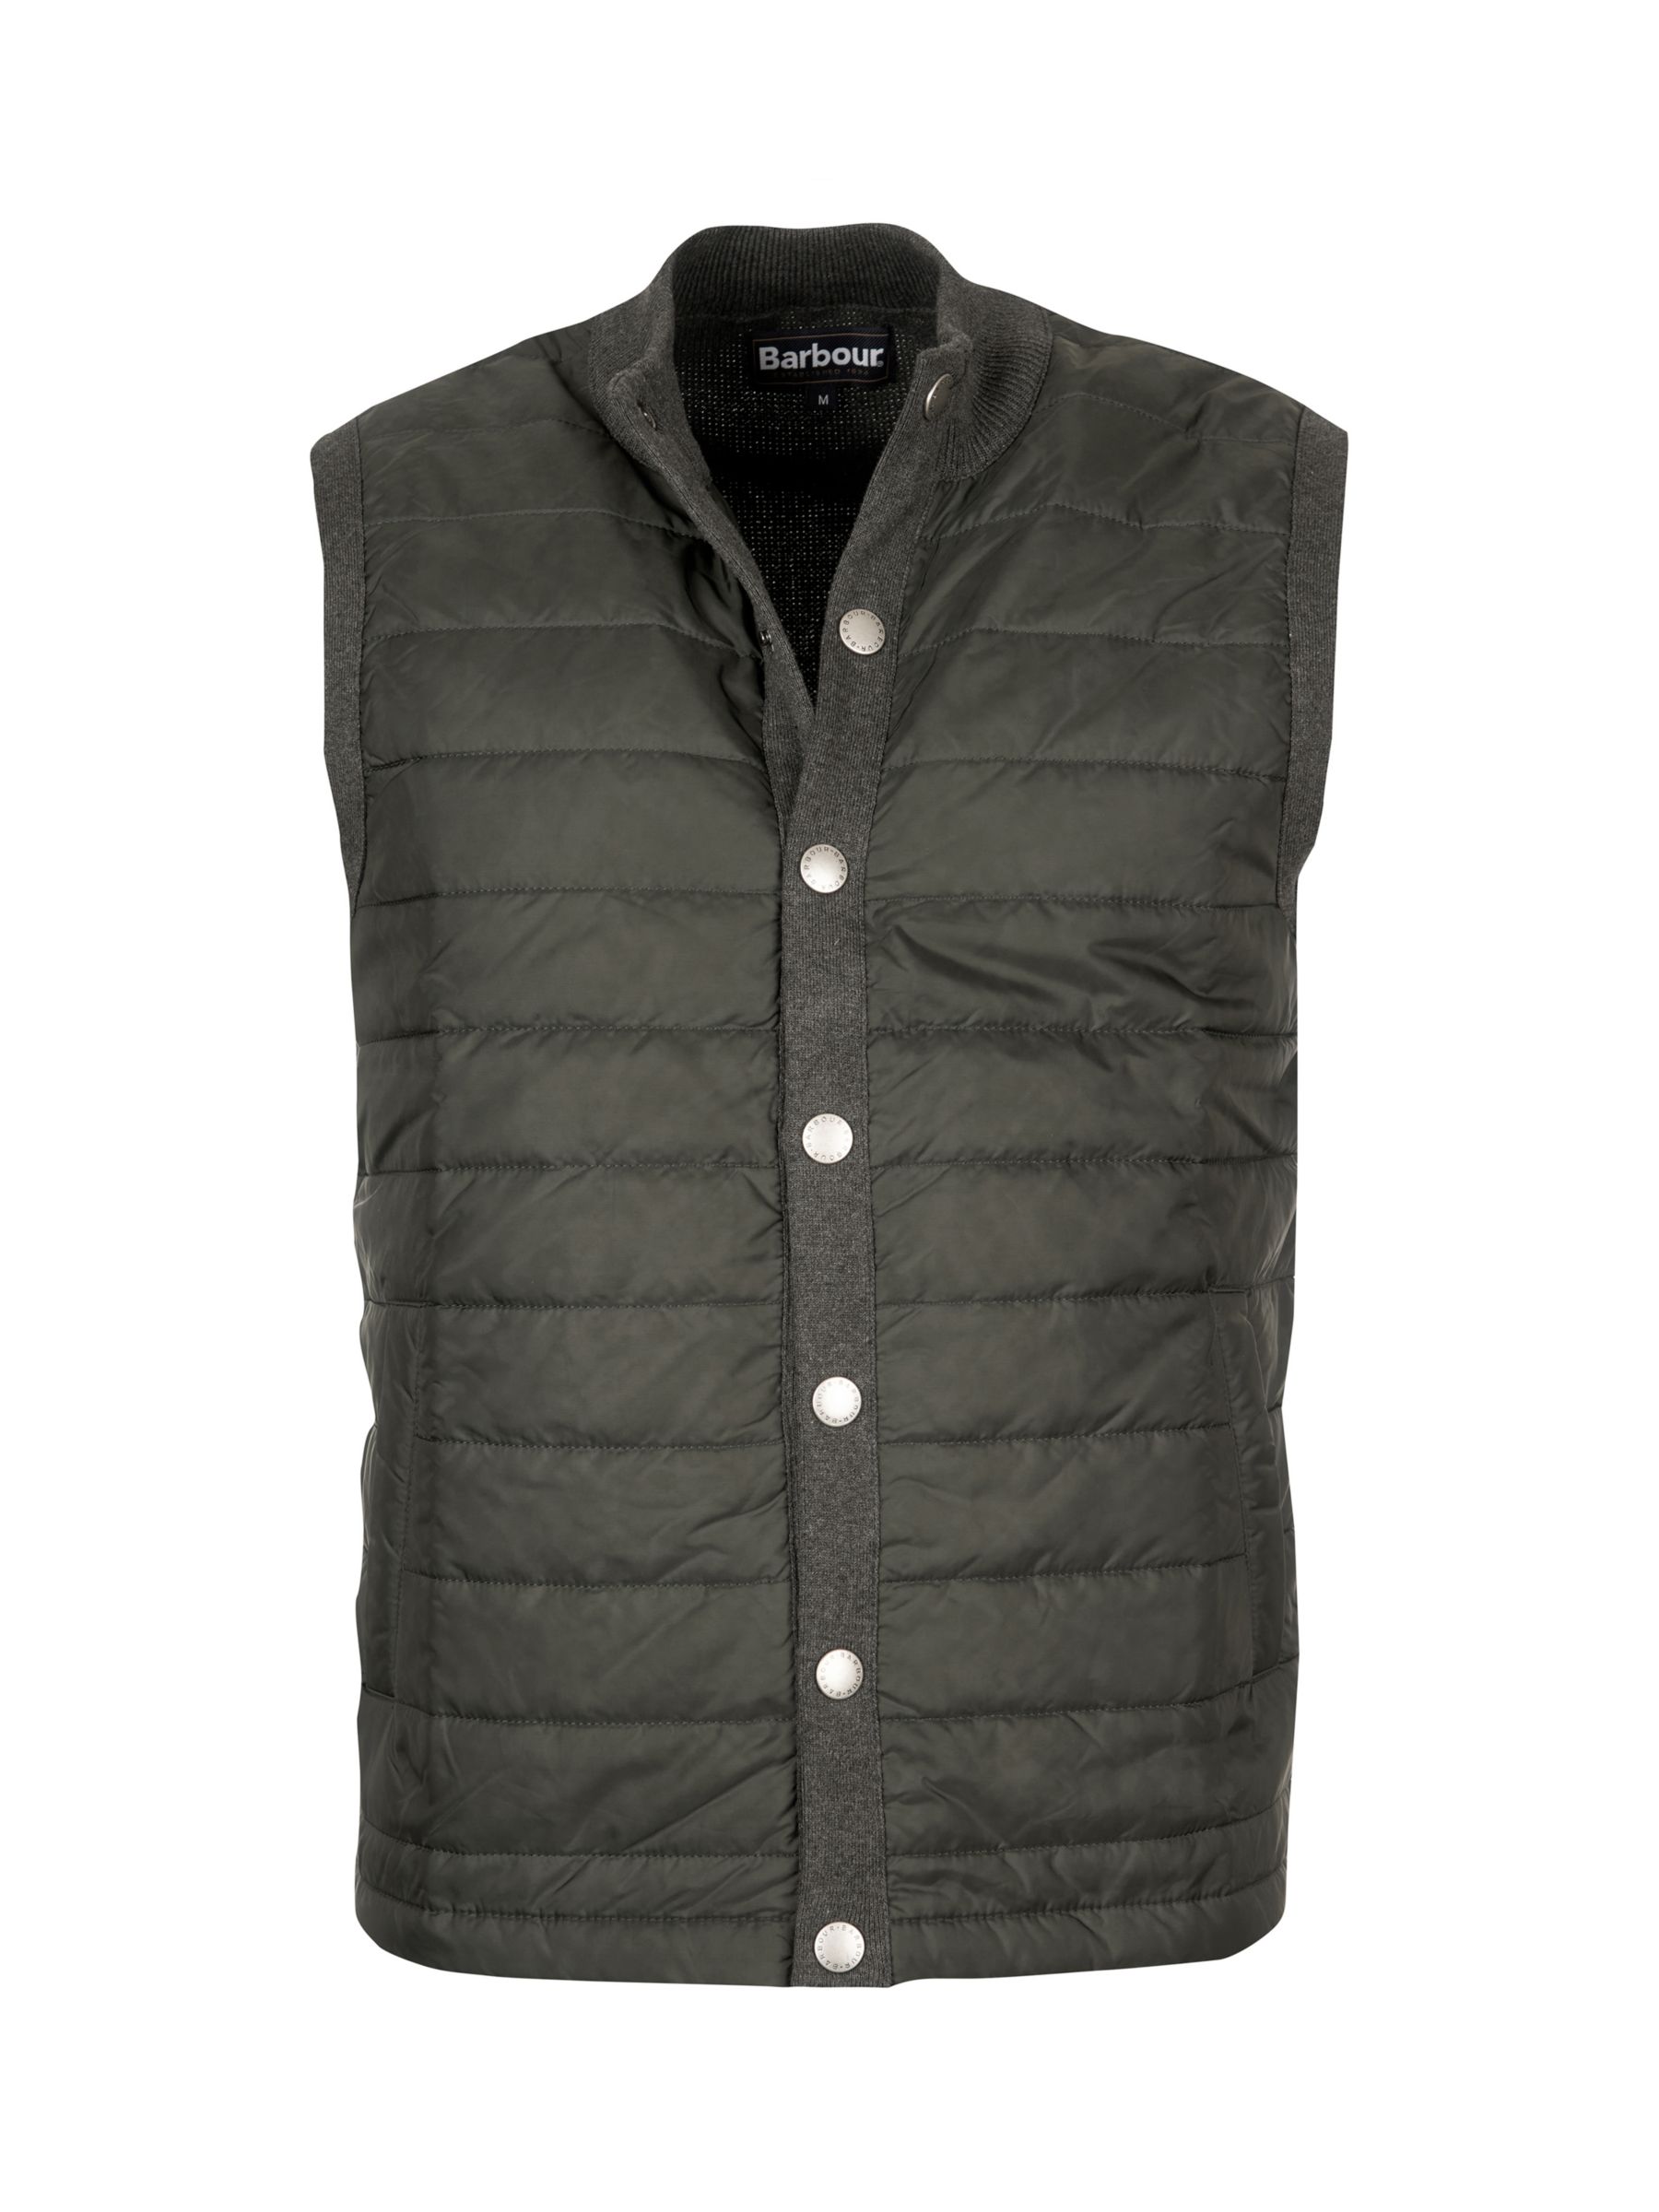 Barbour Essential Gilet, Charcoal at John Lewis & Partners